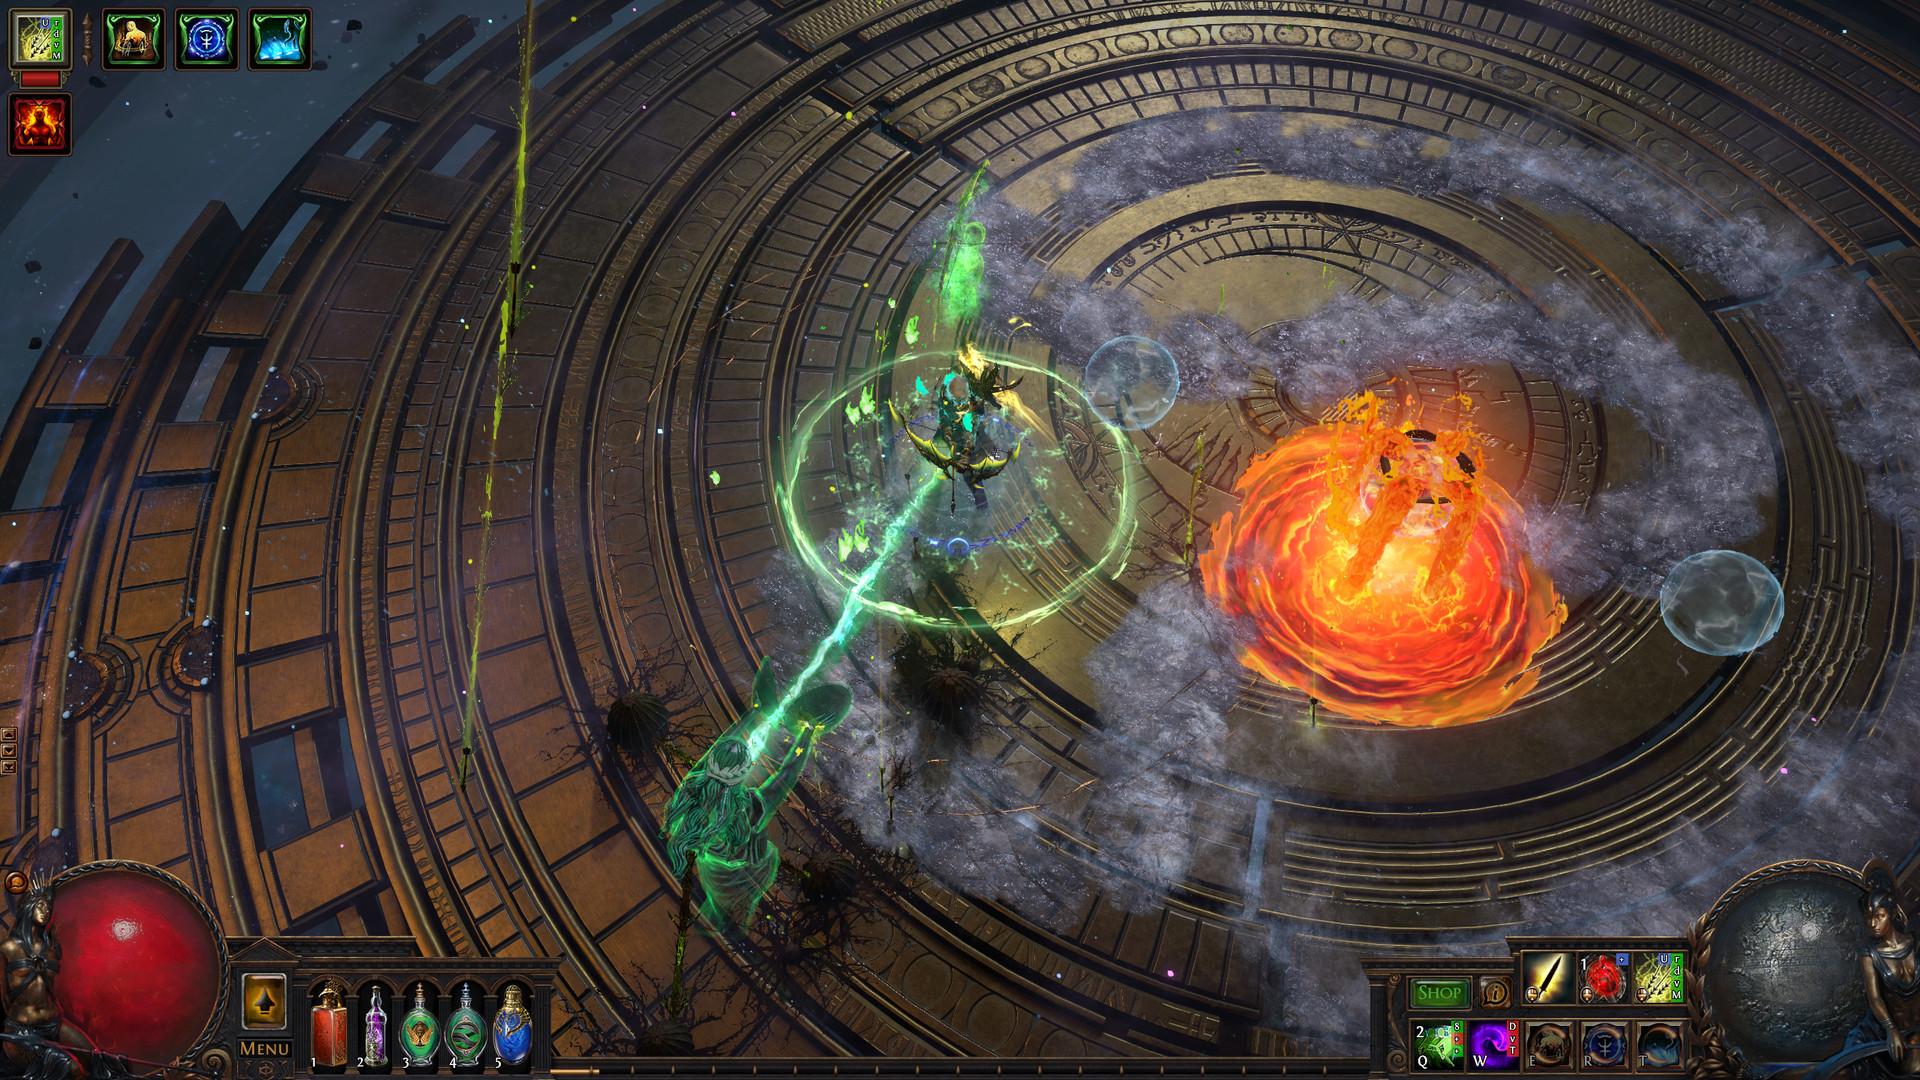 Screenshot №9 from game Path of Exile